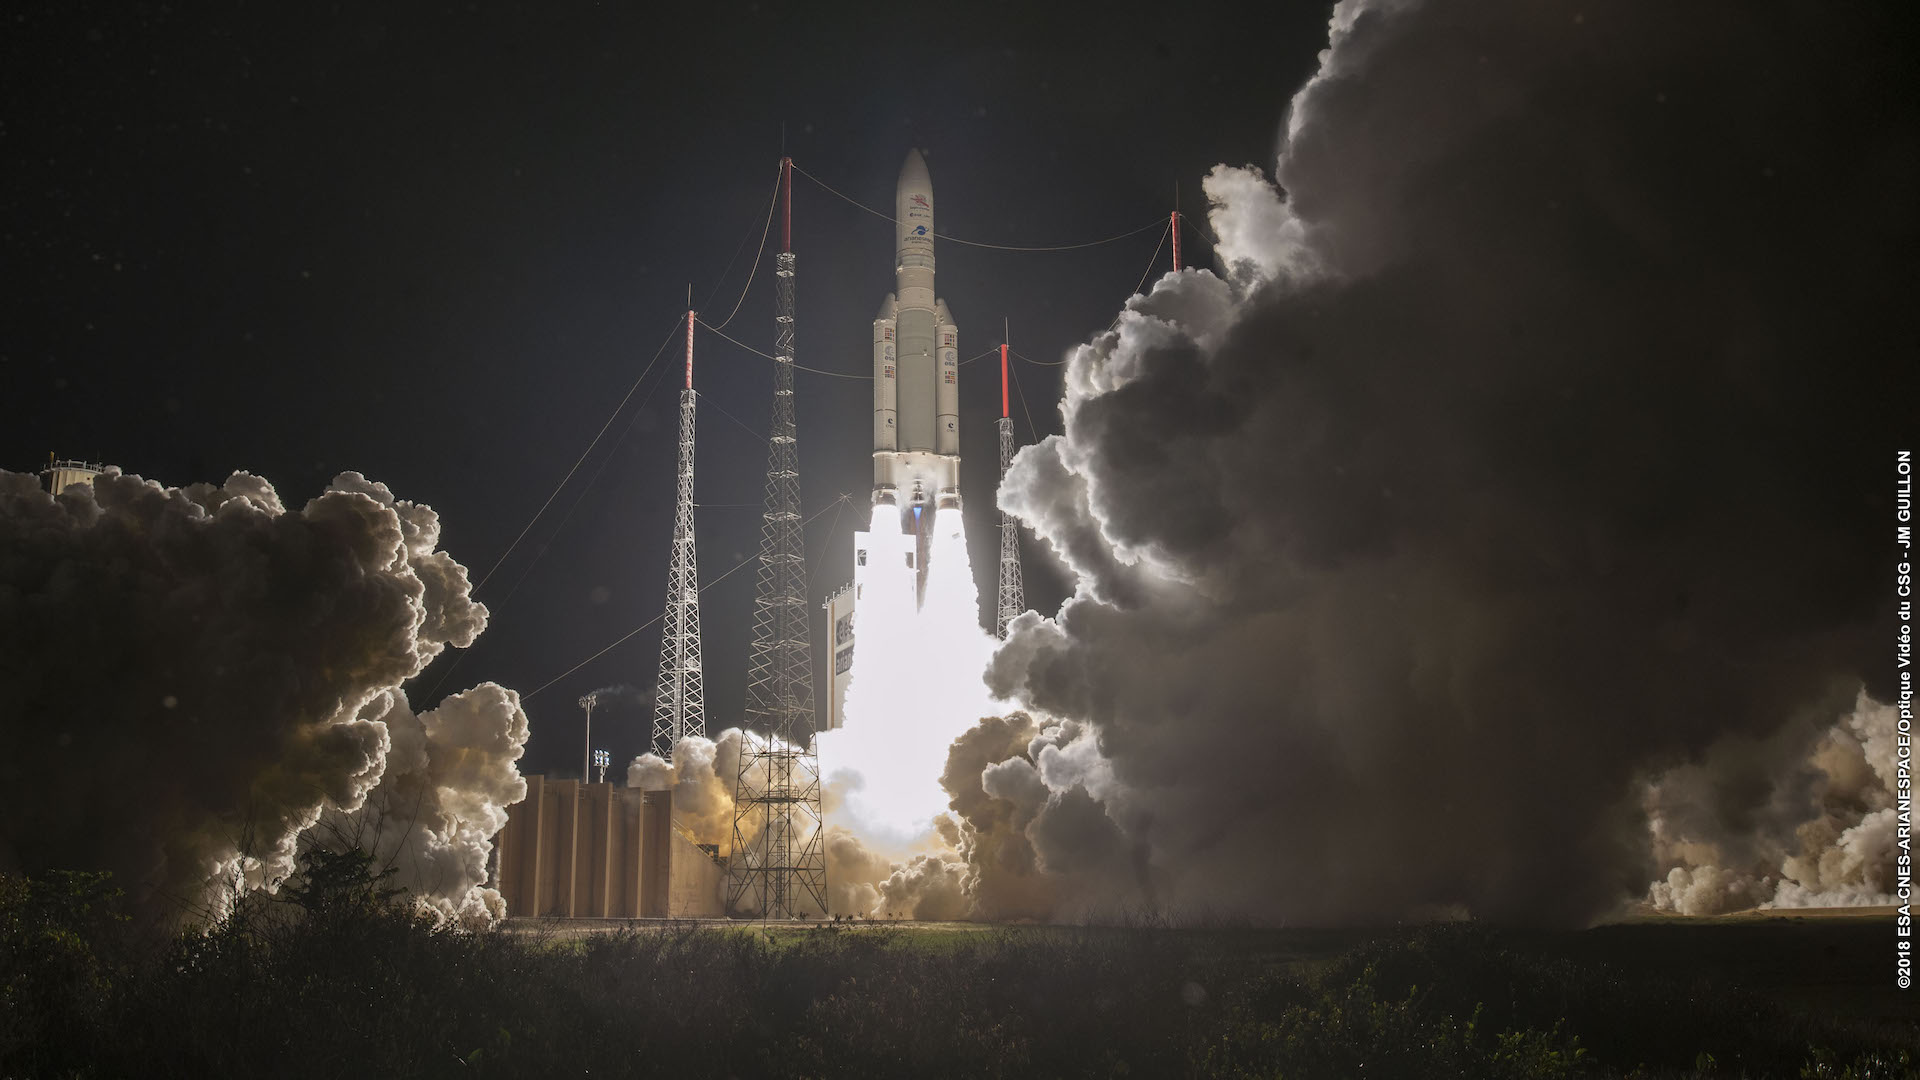 An Ariane 5 rocket lifts off in the dark of night, as its two side booster blast a blinding white fire, a cloud of smoke rises from the launchpad